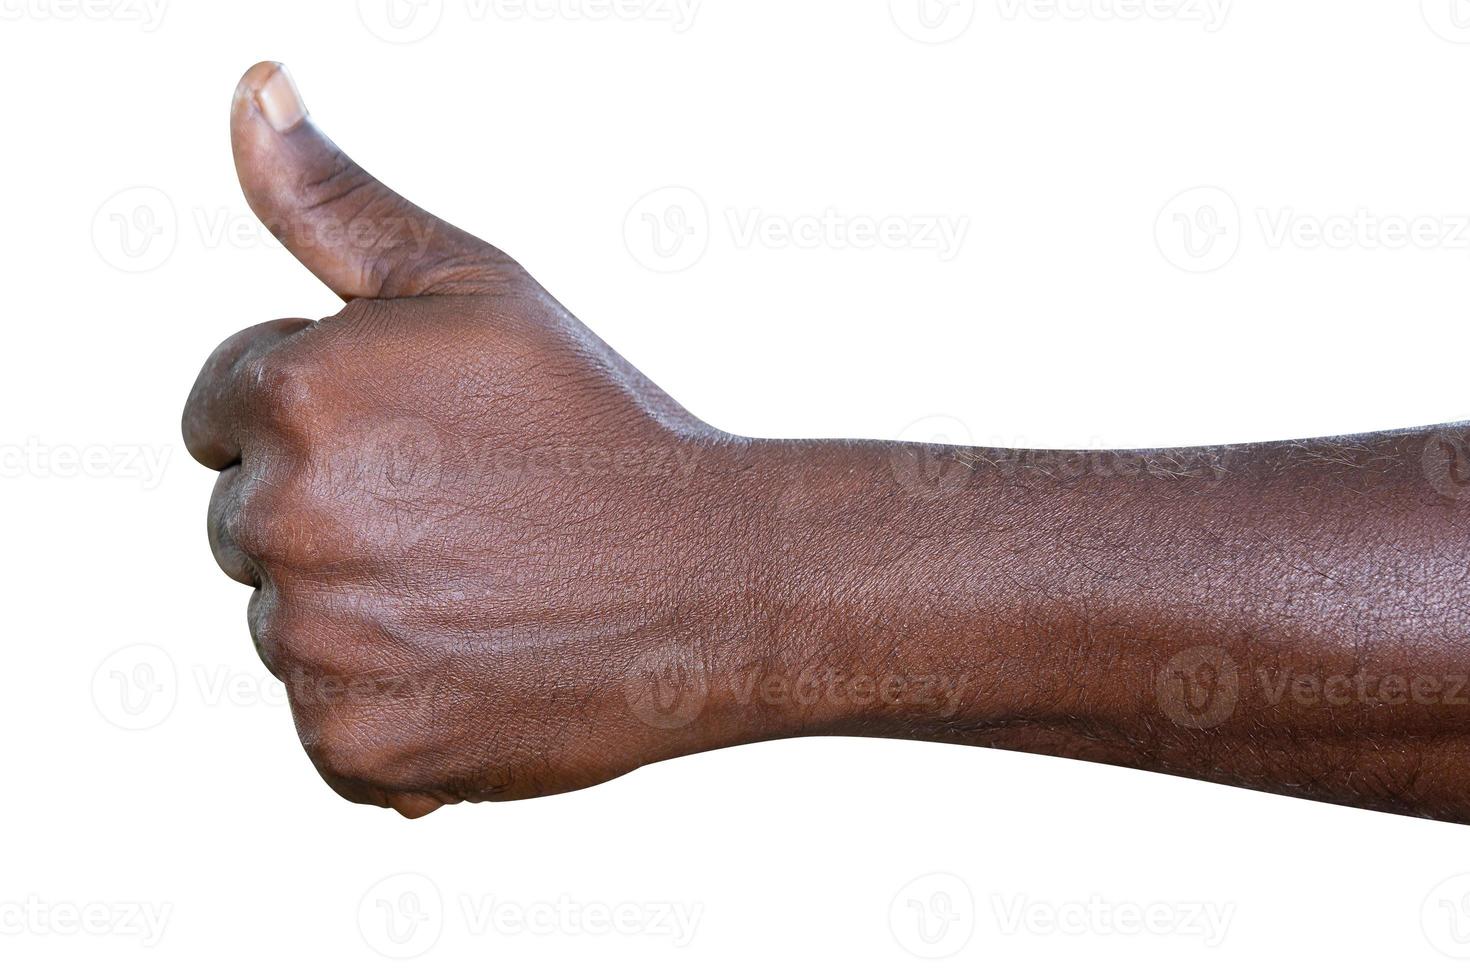 Closeup of male hand showing thumbs up sign against white background photo